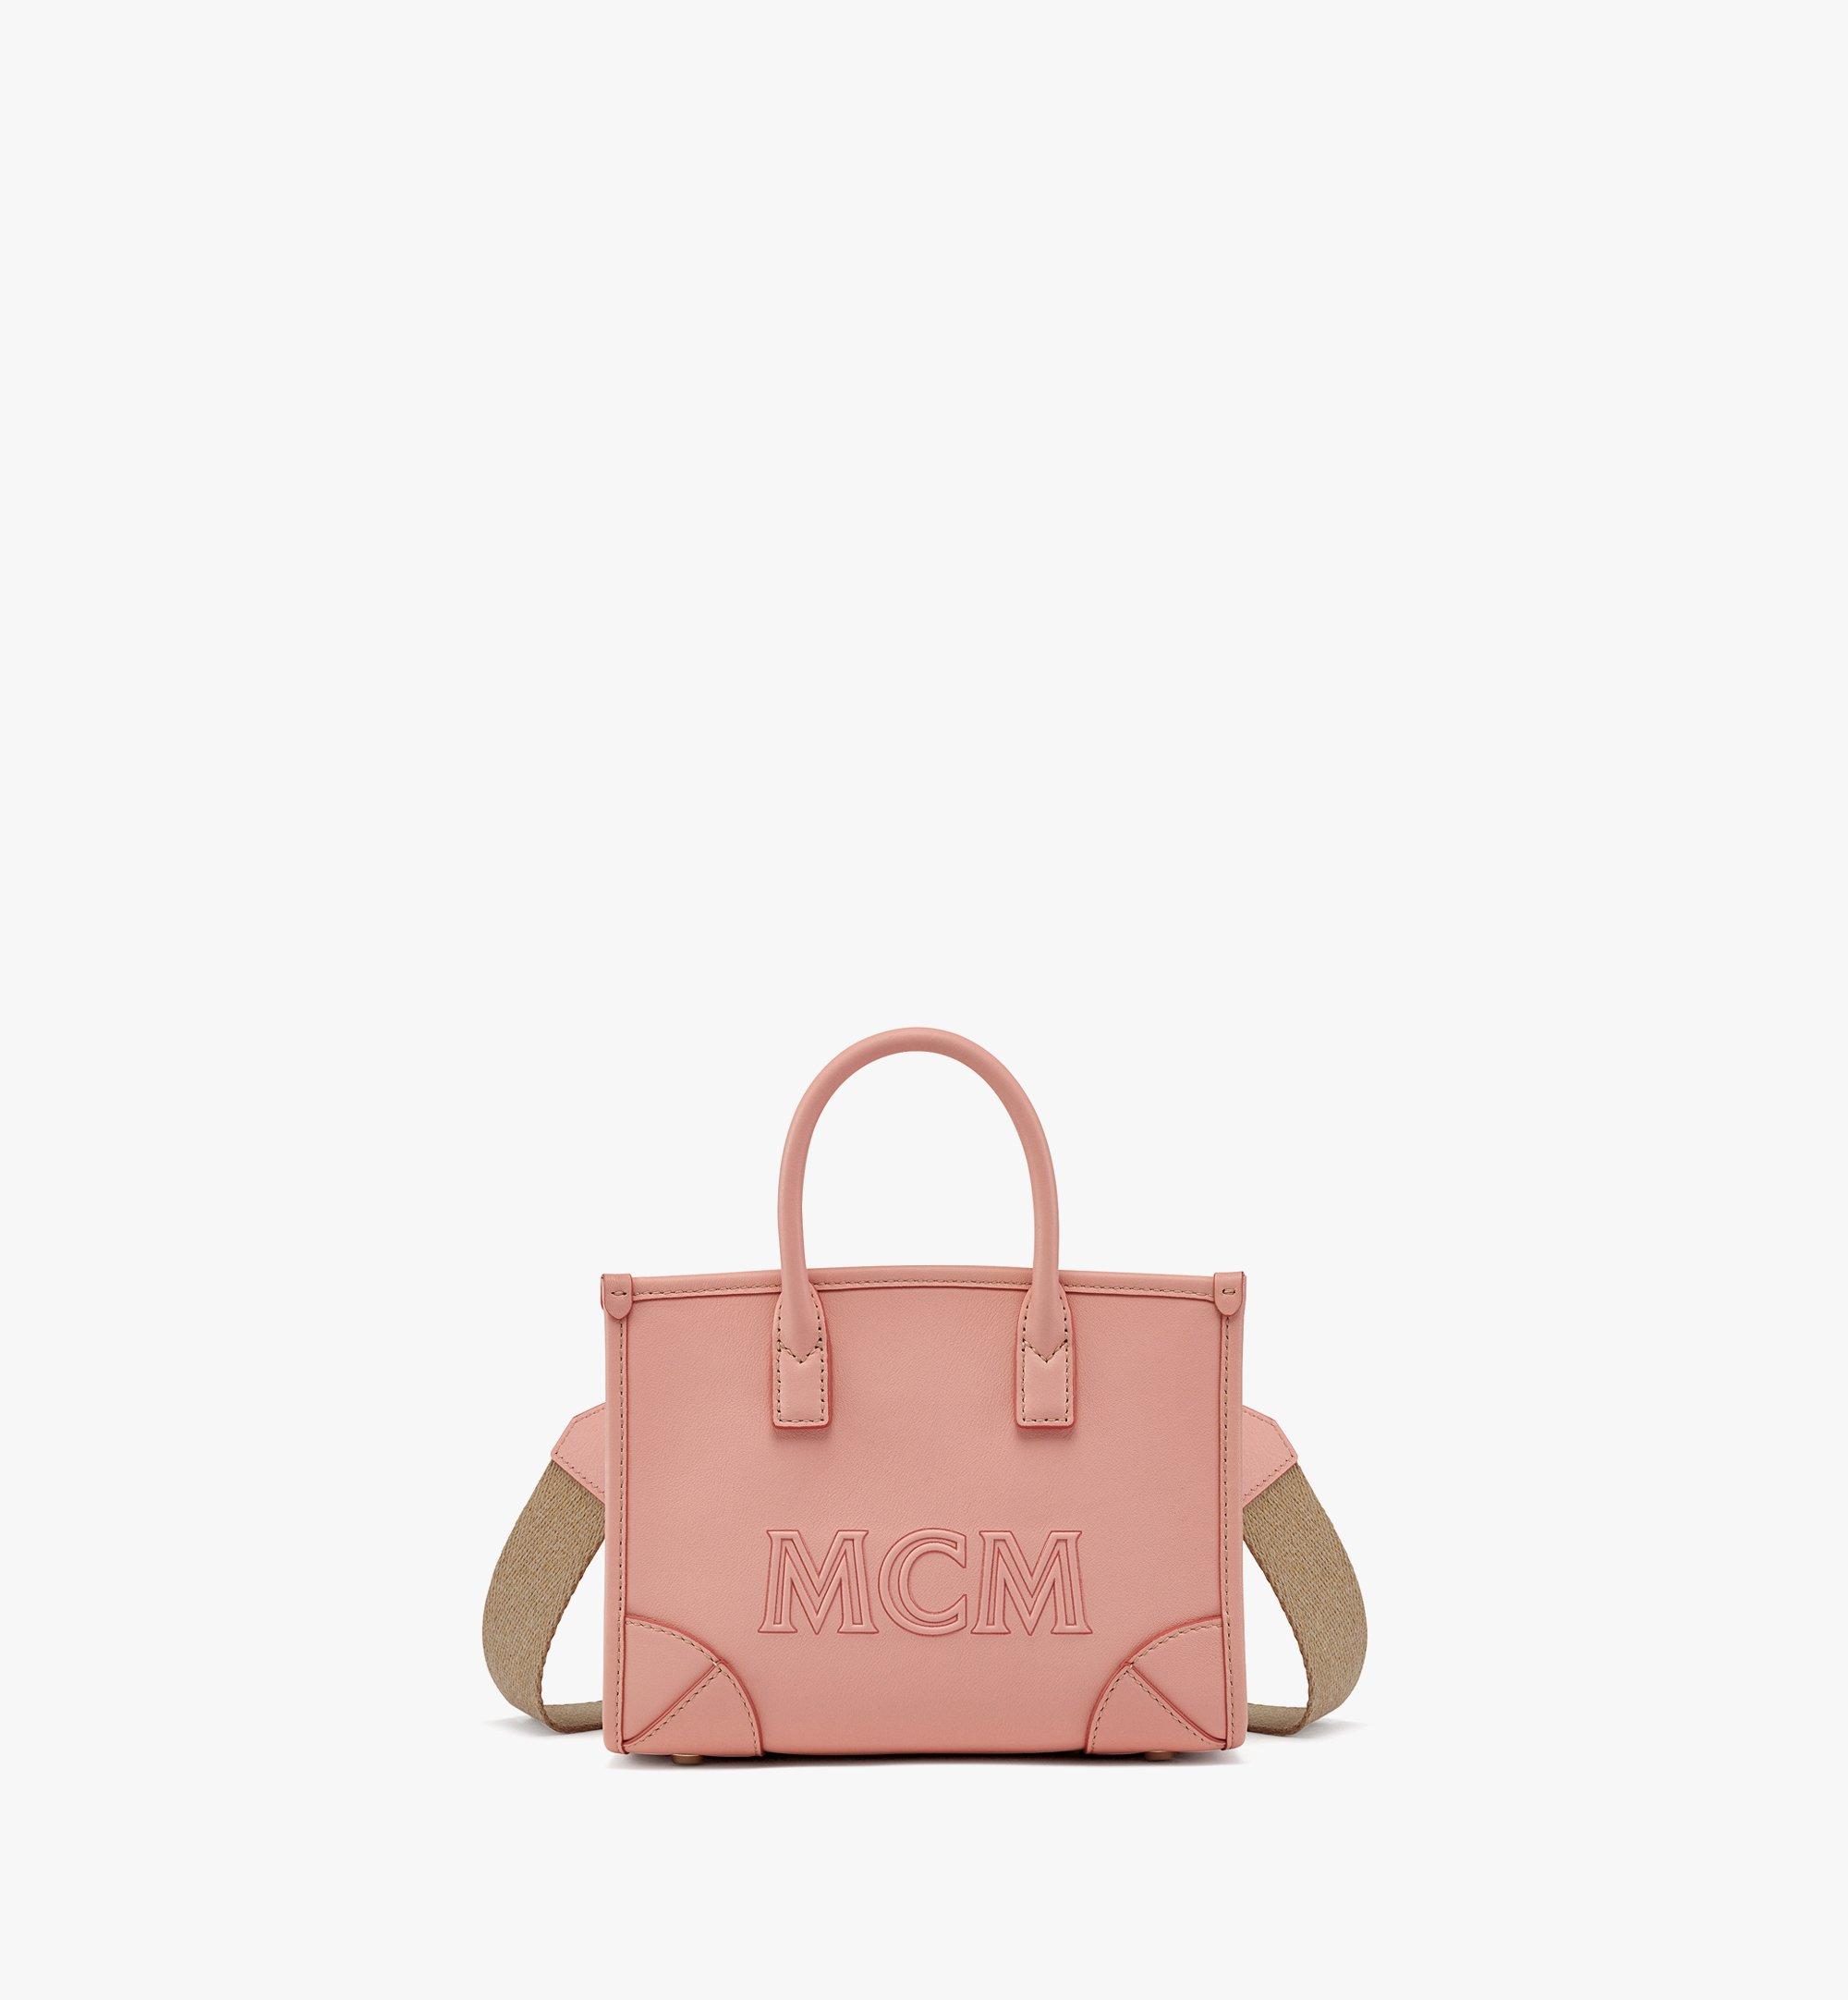 MCM München Tote in Spanish Calf Leather Pink MWTCSBO06PV001 Alternate View 1